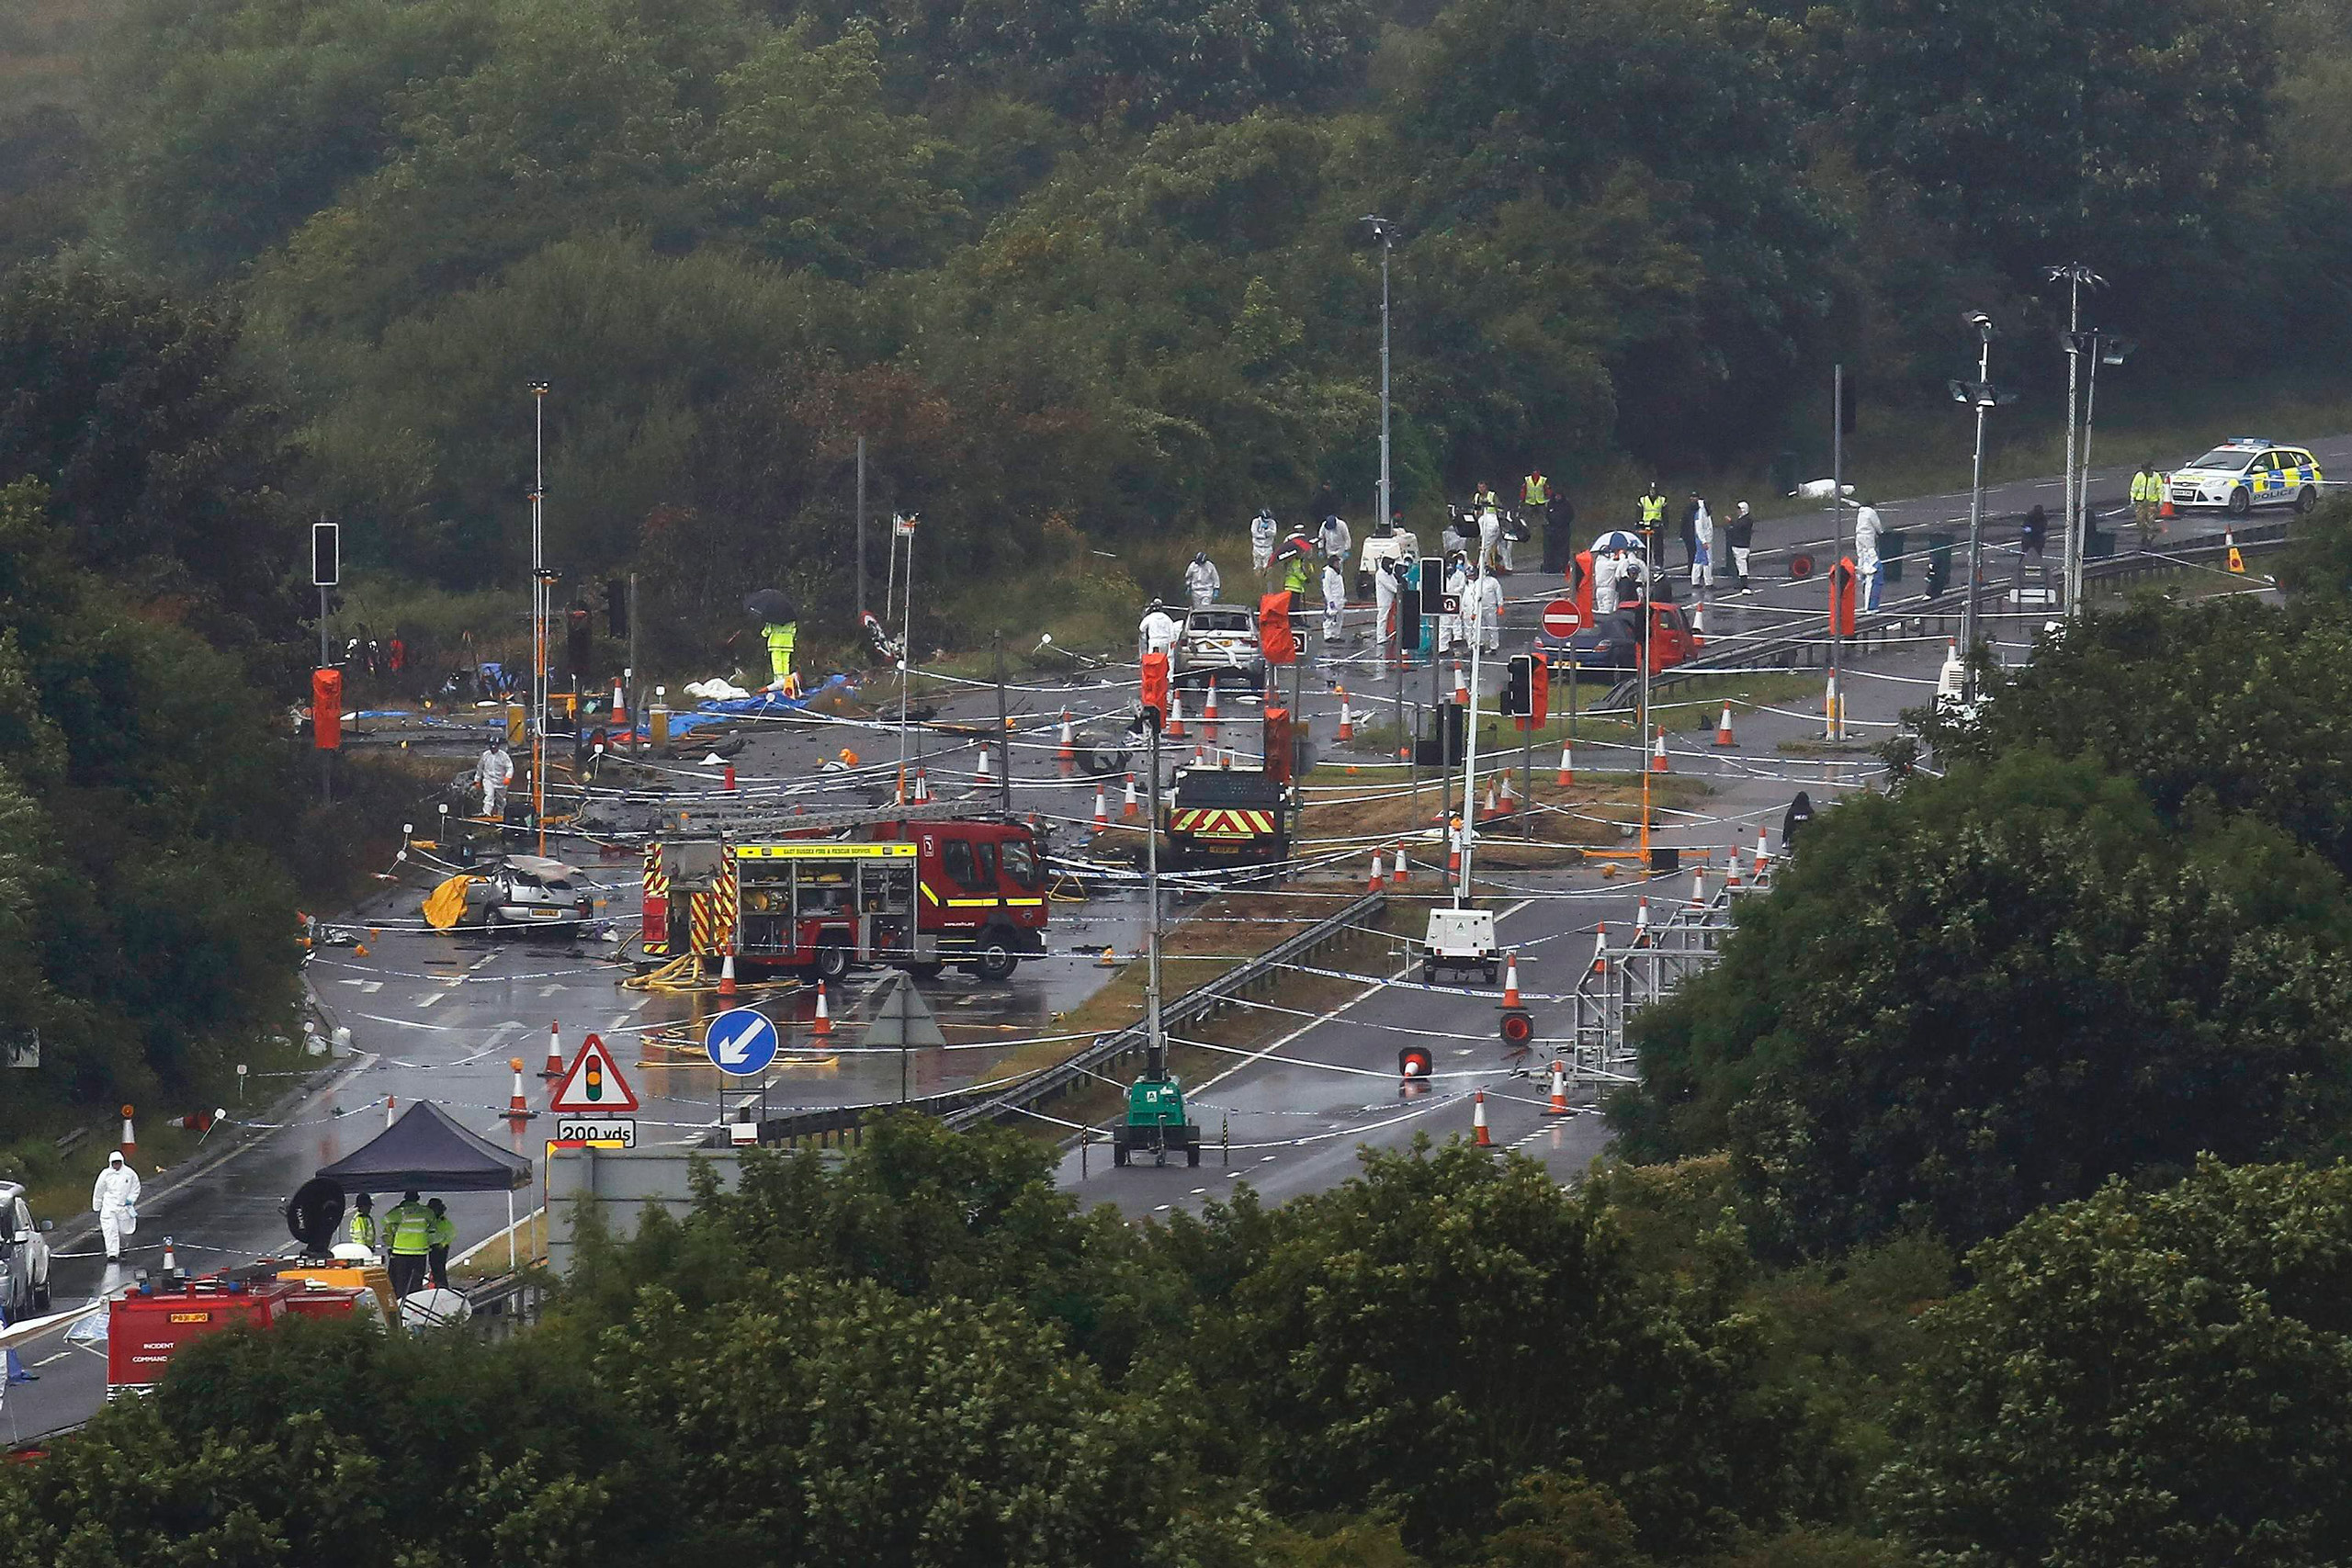 Emergency services and crash investigation officers continue to work at the site where a Hawker Hunter fighter jet crashed onto the A27 road at Shoreham near Brighton